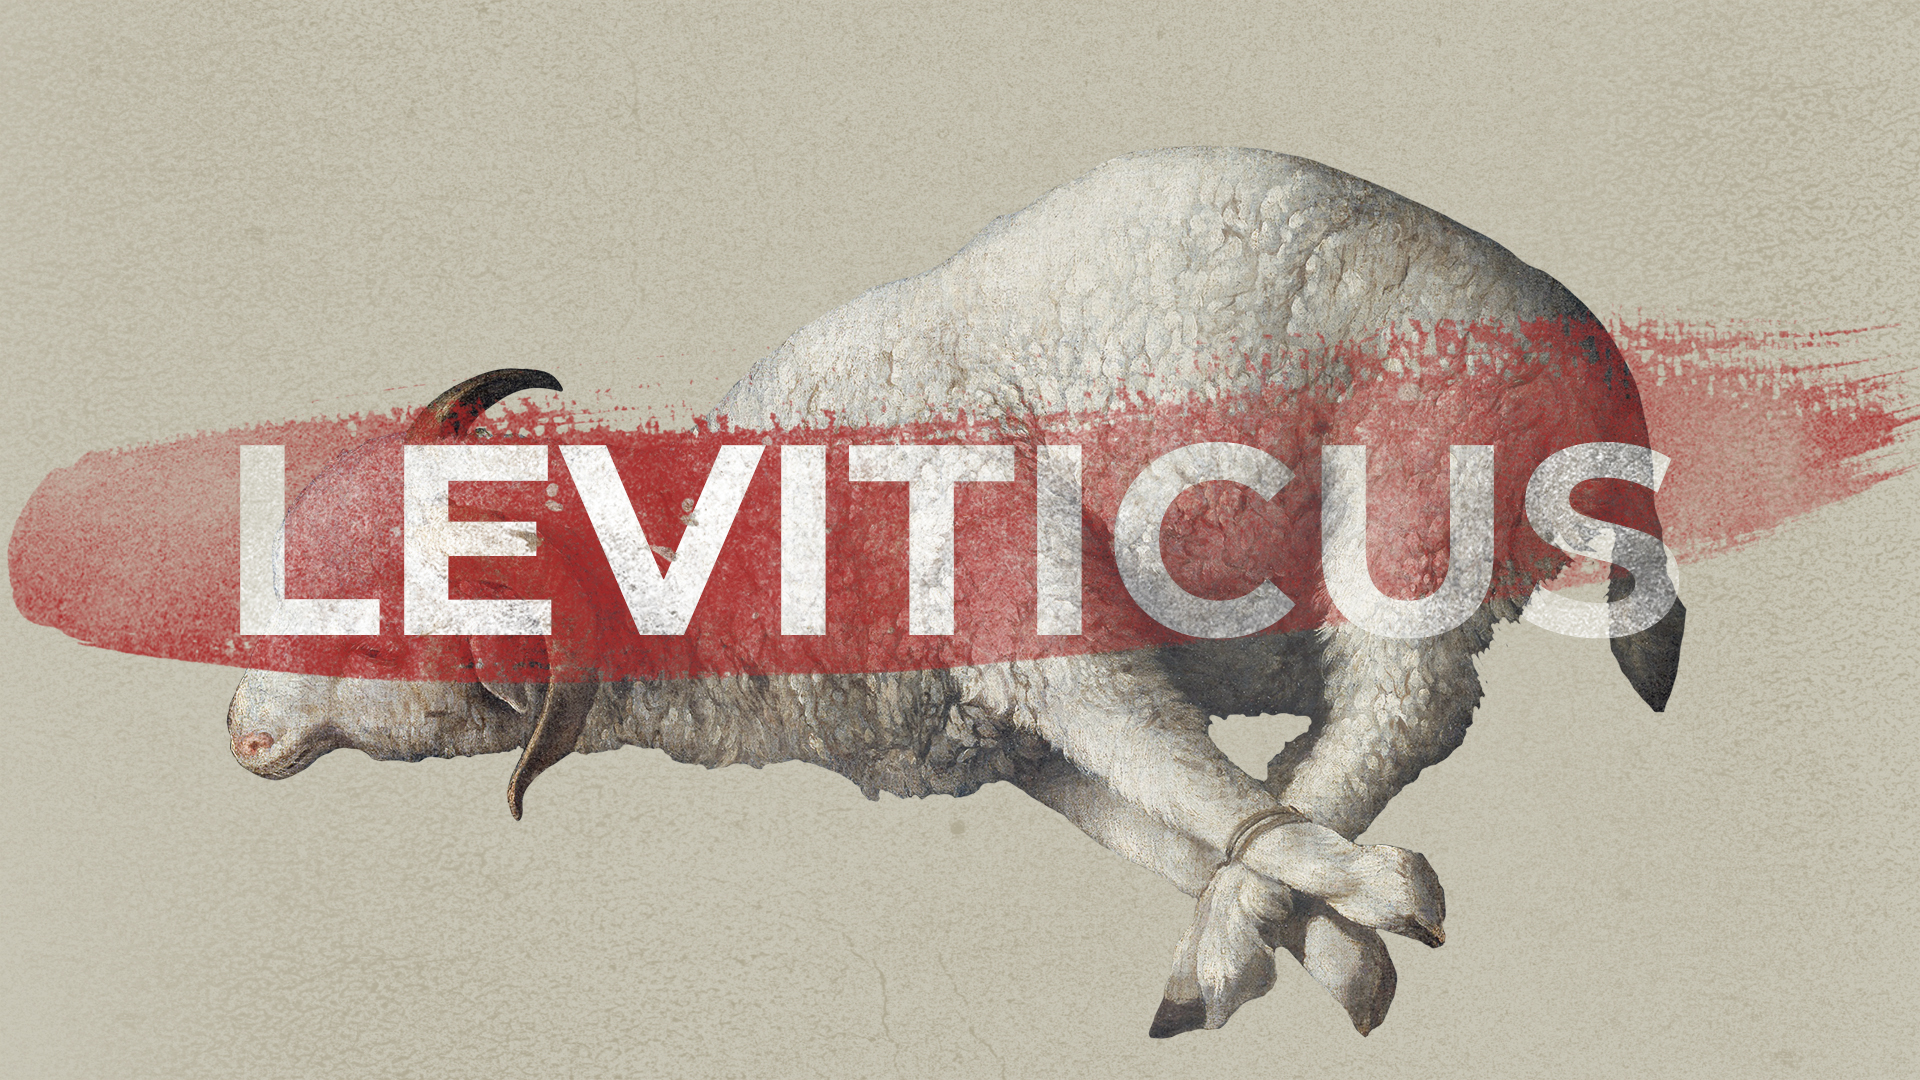 Leviticus graphic with a sheep bound up in the background